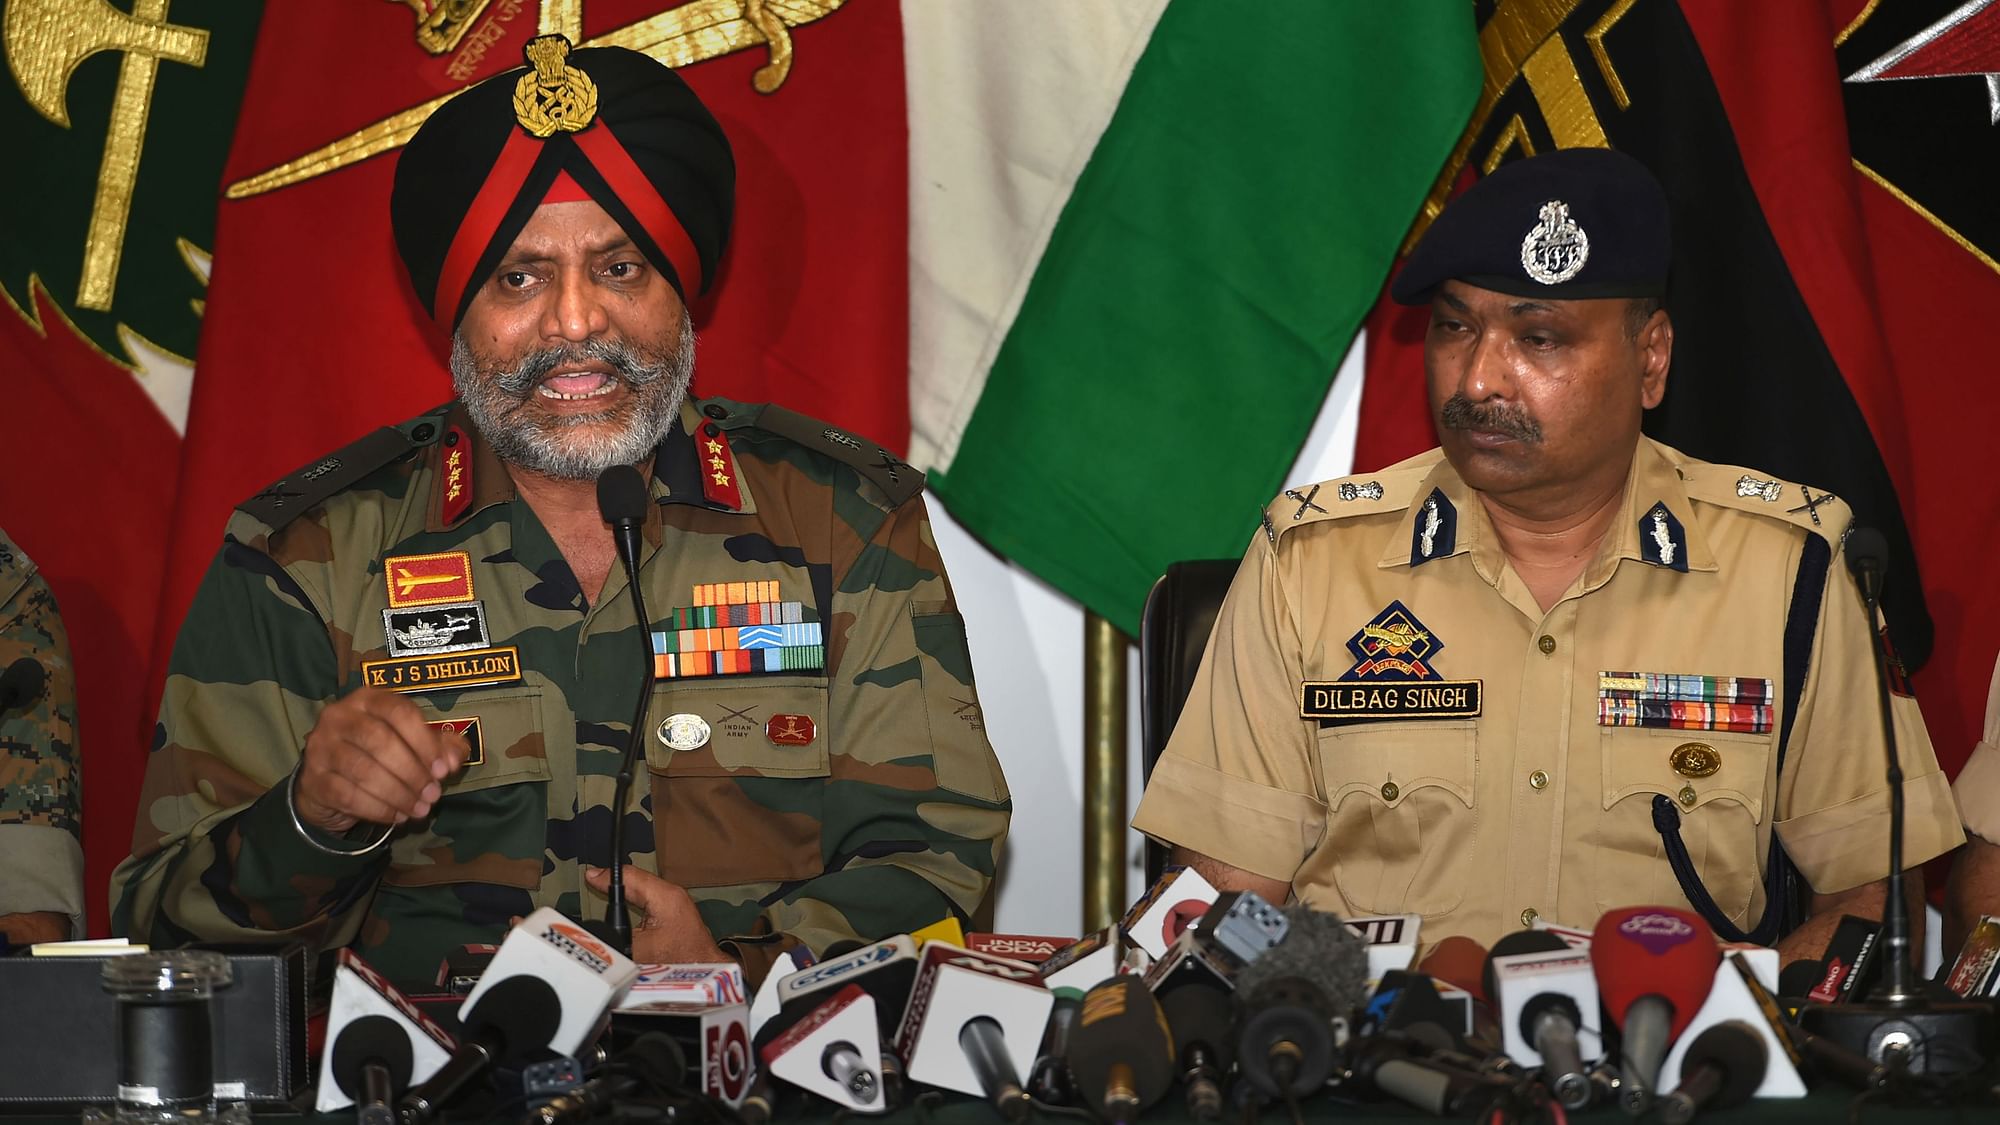  GoC 15 Corps Lt General KJS Dhillon  and DGP Dilbagh Singh address a joint press conference  in Srinagar on 2 August.&nbsp;